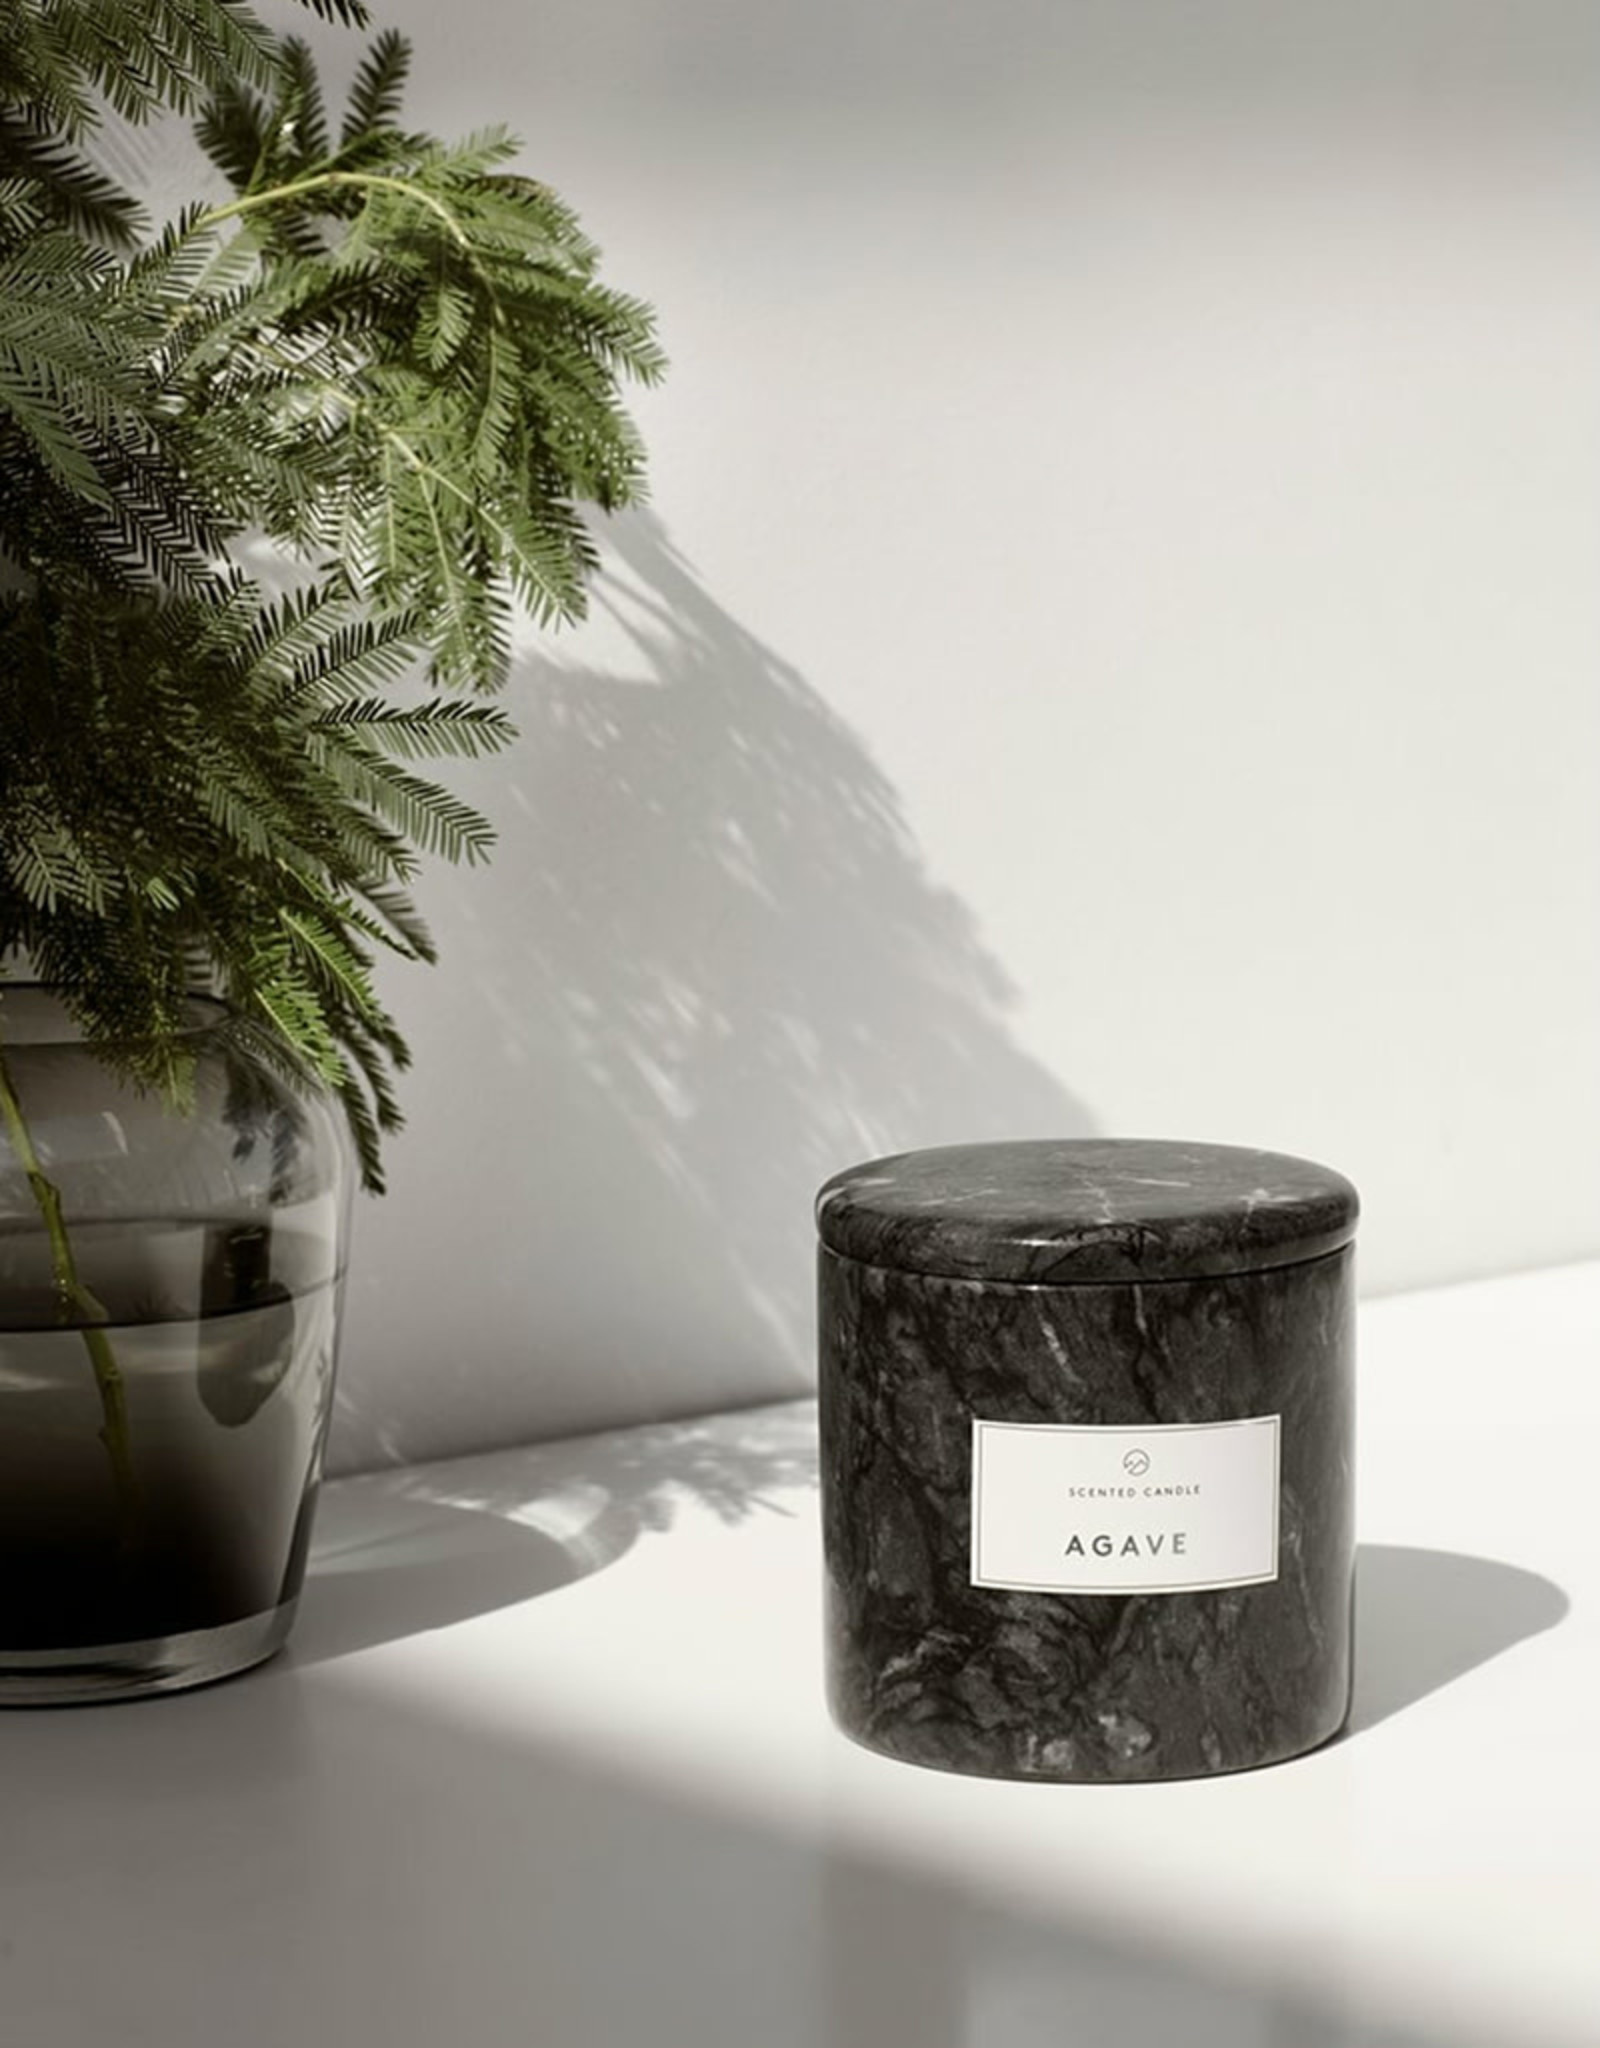 Blomus Frable Scented Candle | Agave